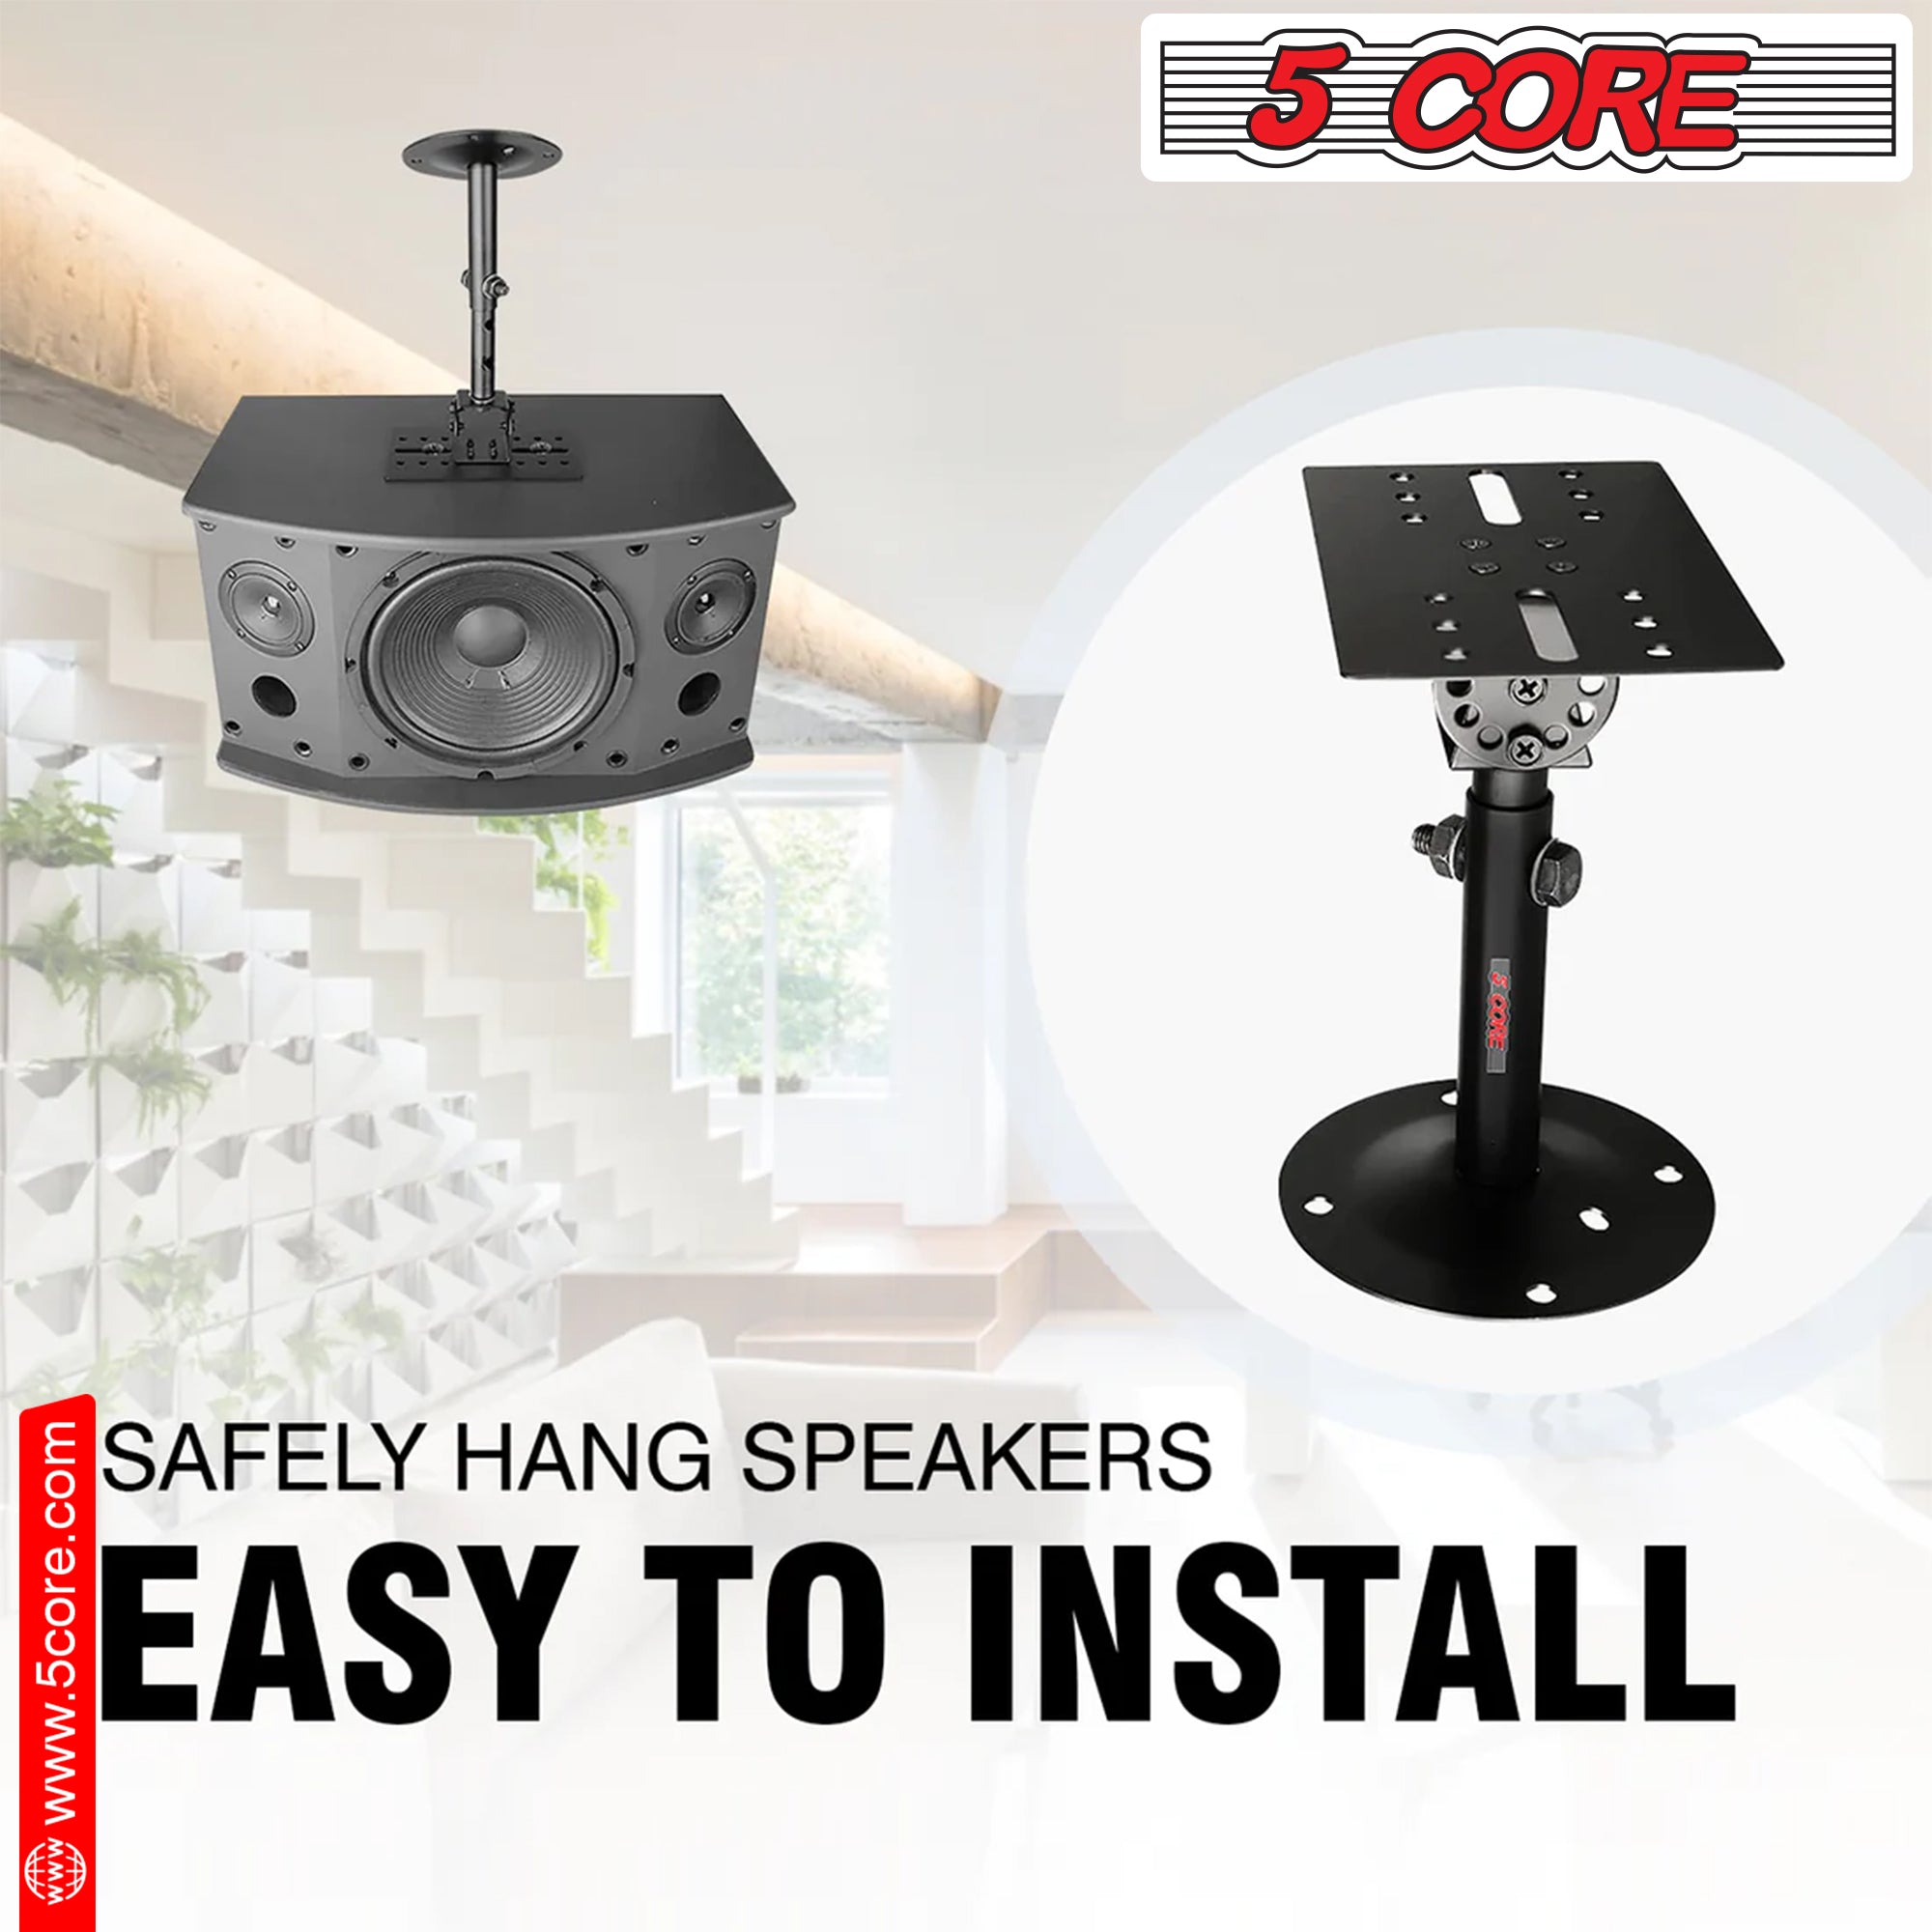 5 Core Speaker Wall Ceiling Mount Stand 2 Pieces Black Sturdy Speaker Mounting Bracket w/ Adjustable Swivel Tilt, Retractable Telescopic Arm for Surround Sound System Bookshelf Satellite Speakers 75 lbs Capacity -WST 01 Pair